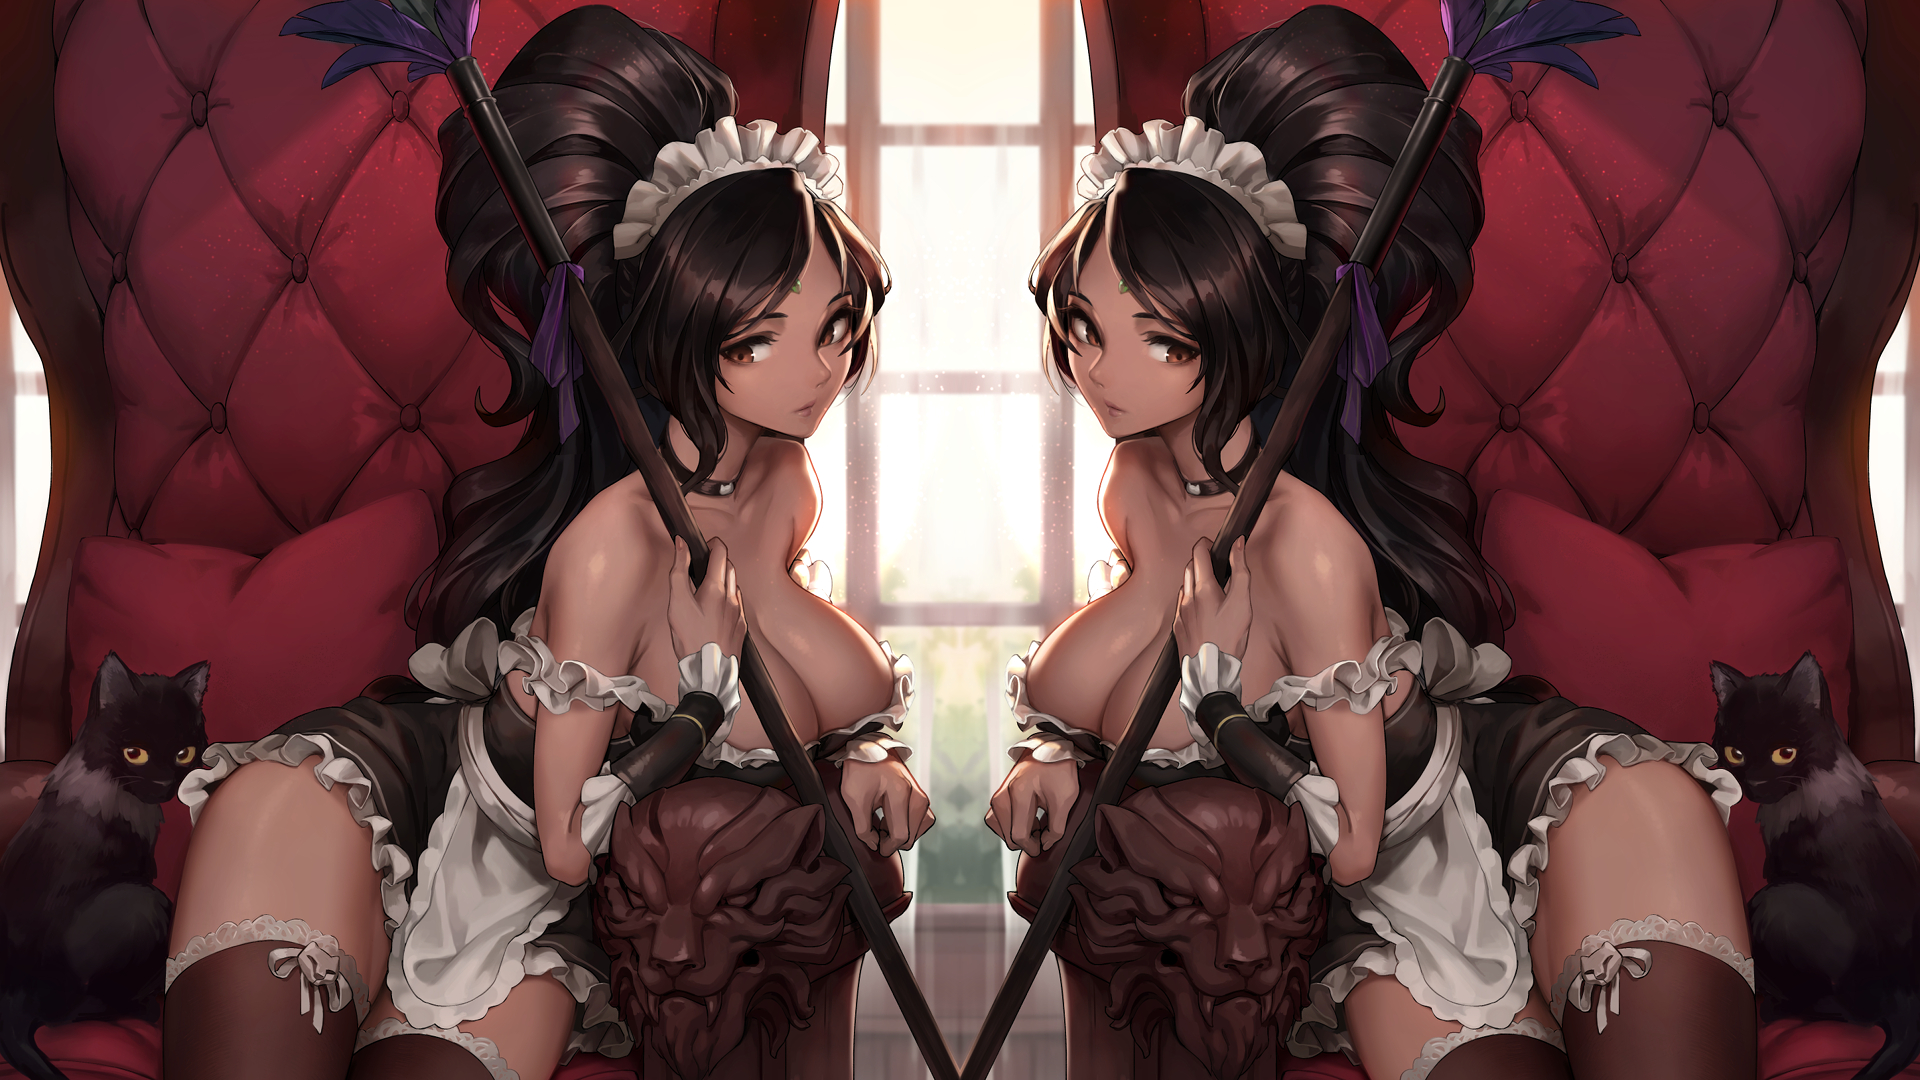 General 1920x1080 big boobs Nidalee (League of Legends) cleavage League of Legends maid outfit brunette